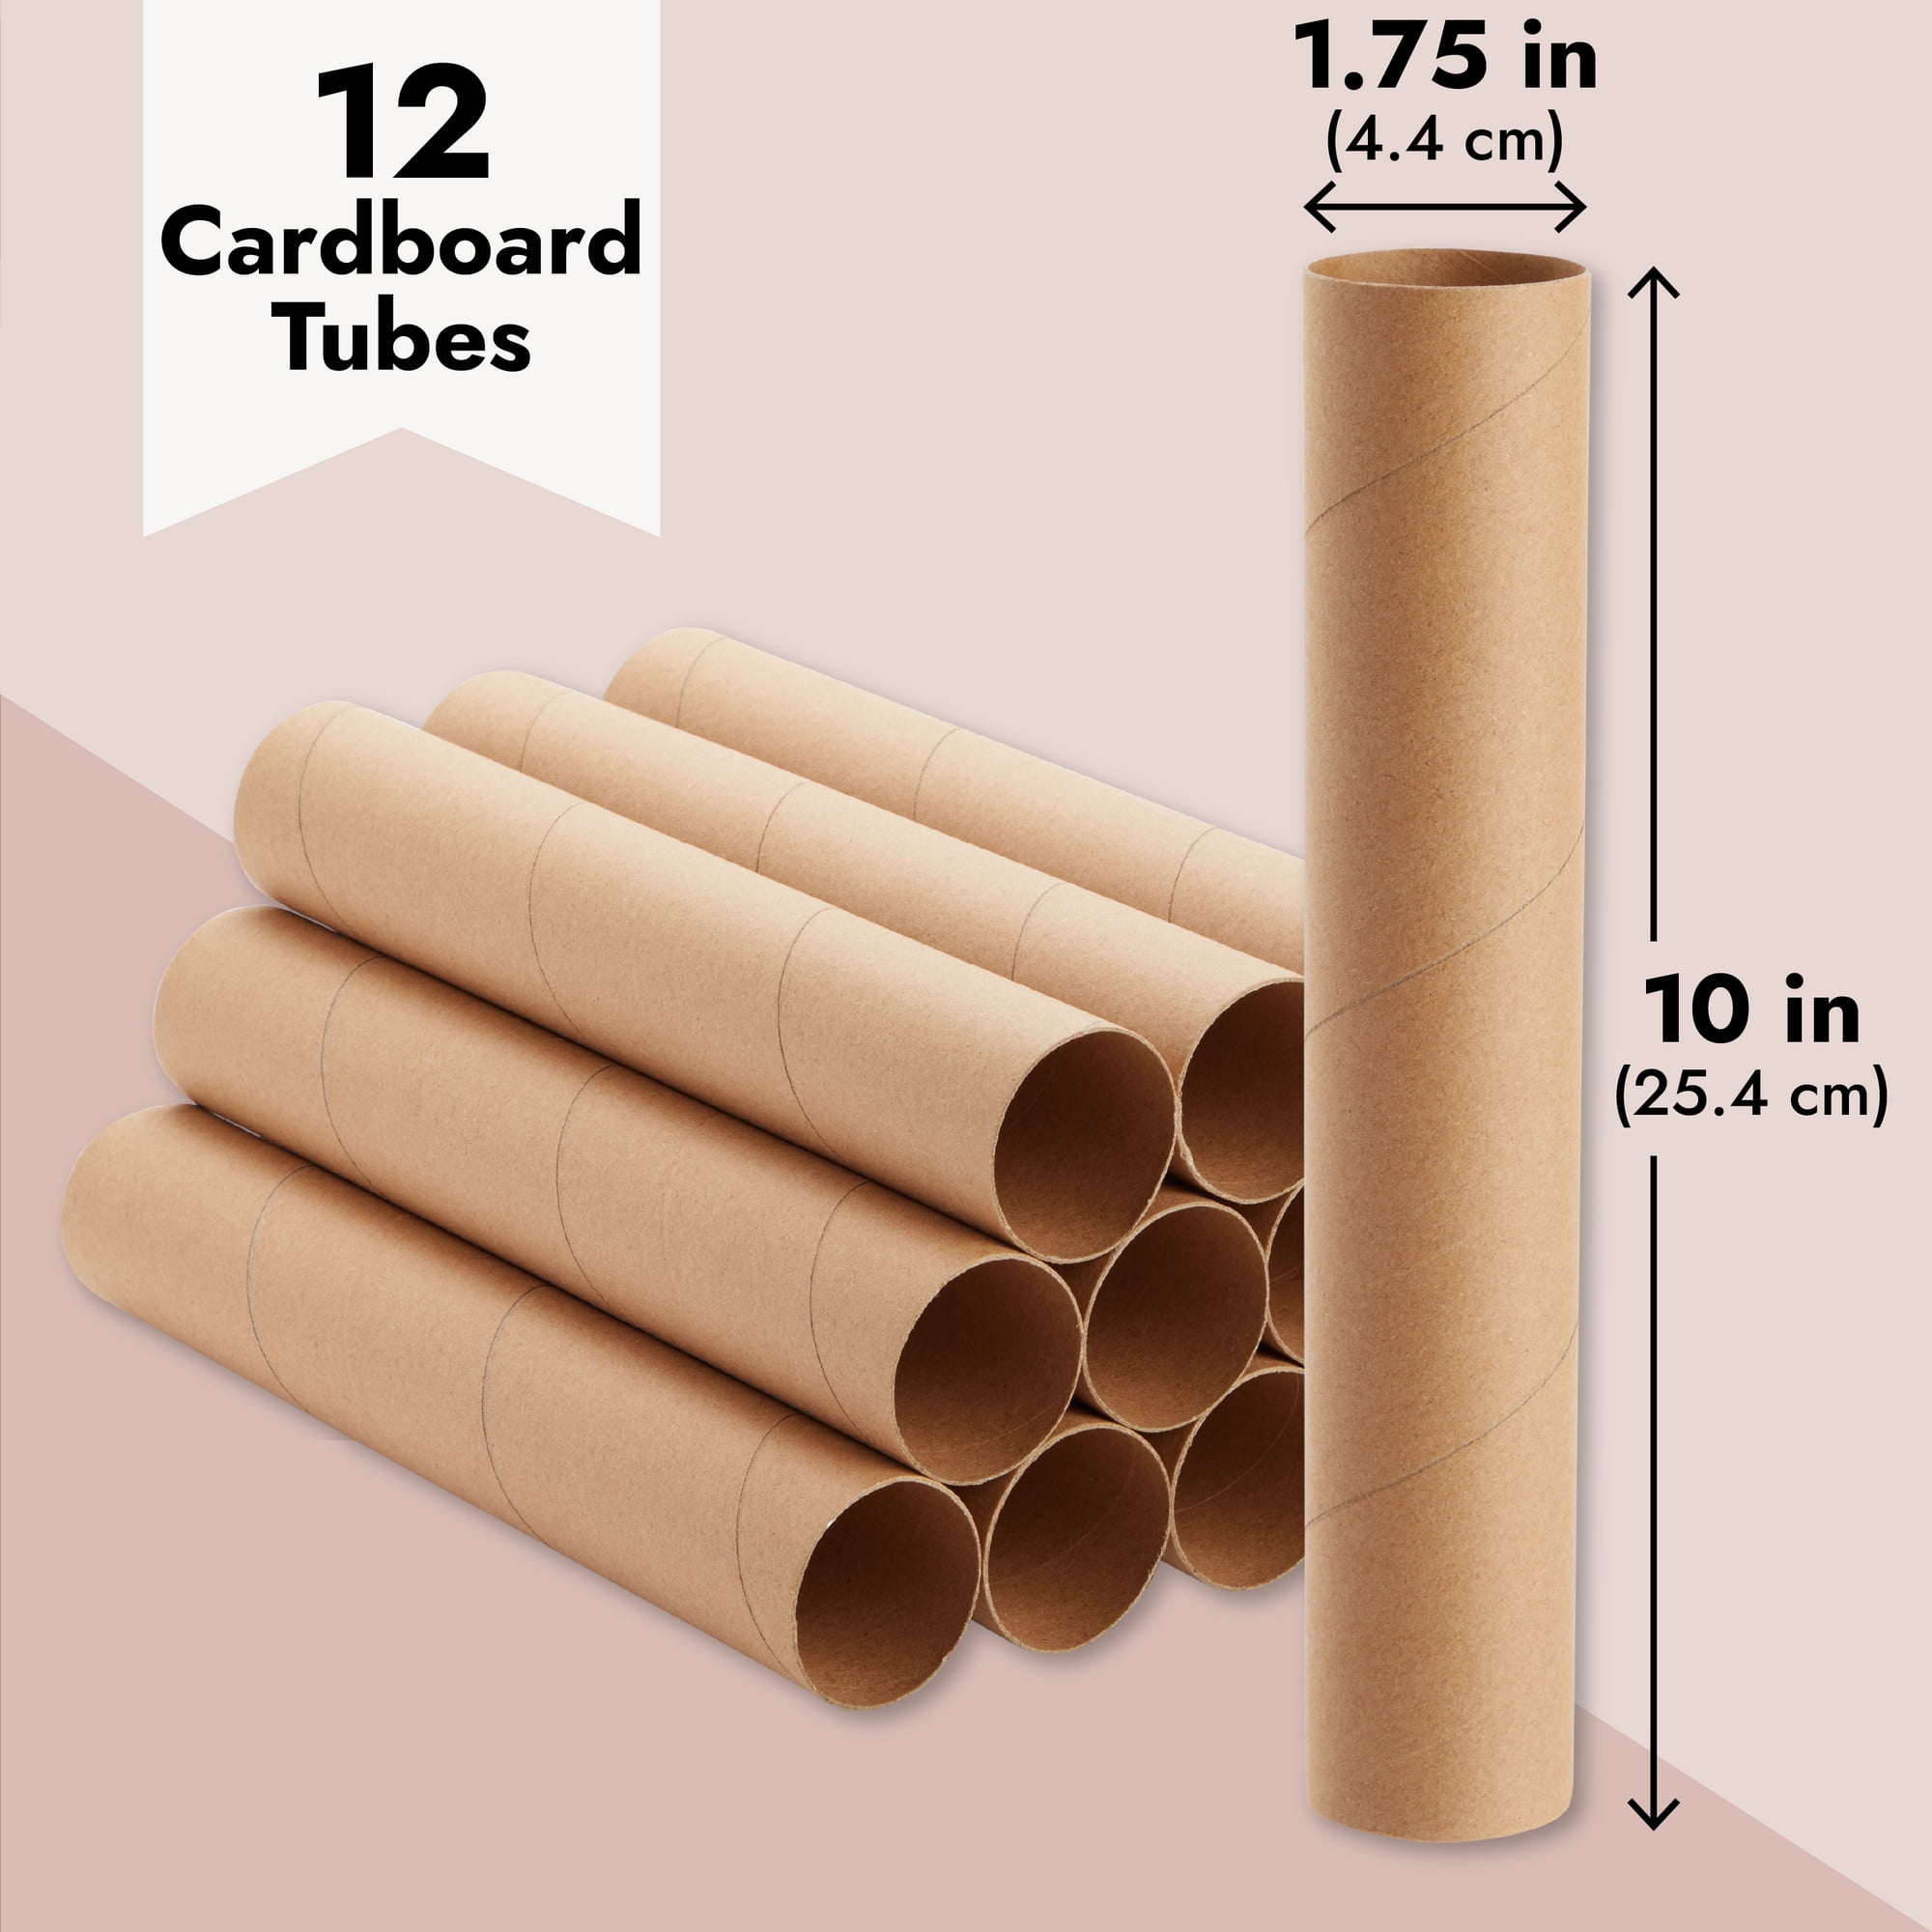 How To Strengthen Cardboard Tubes